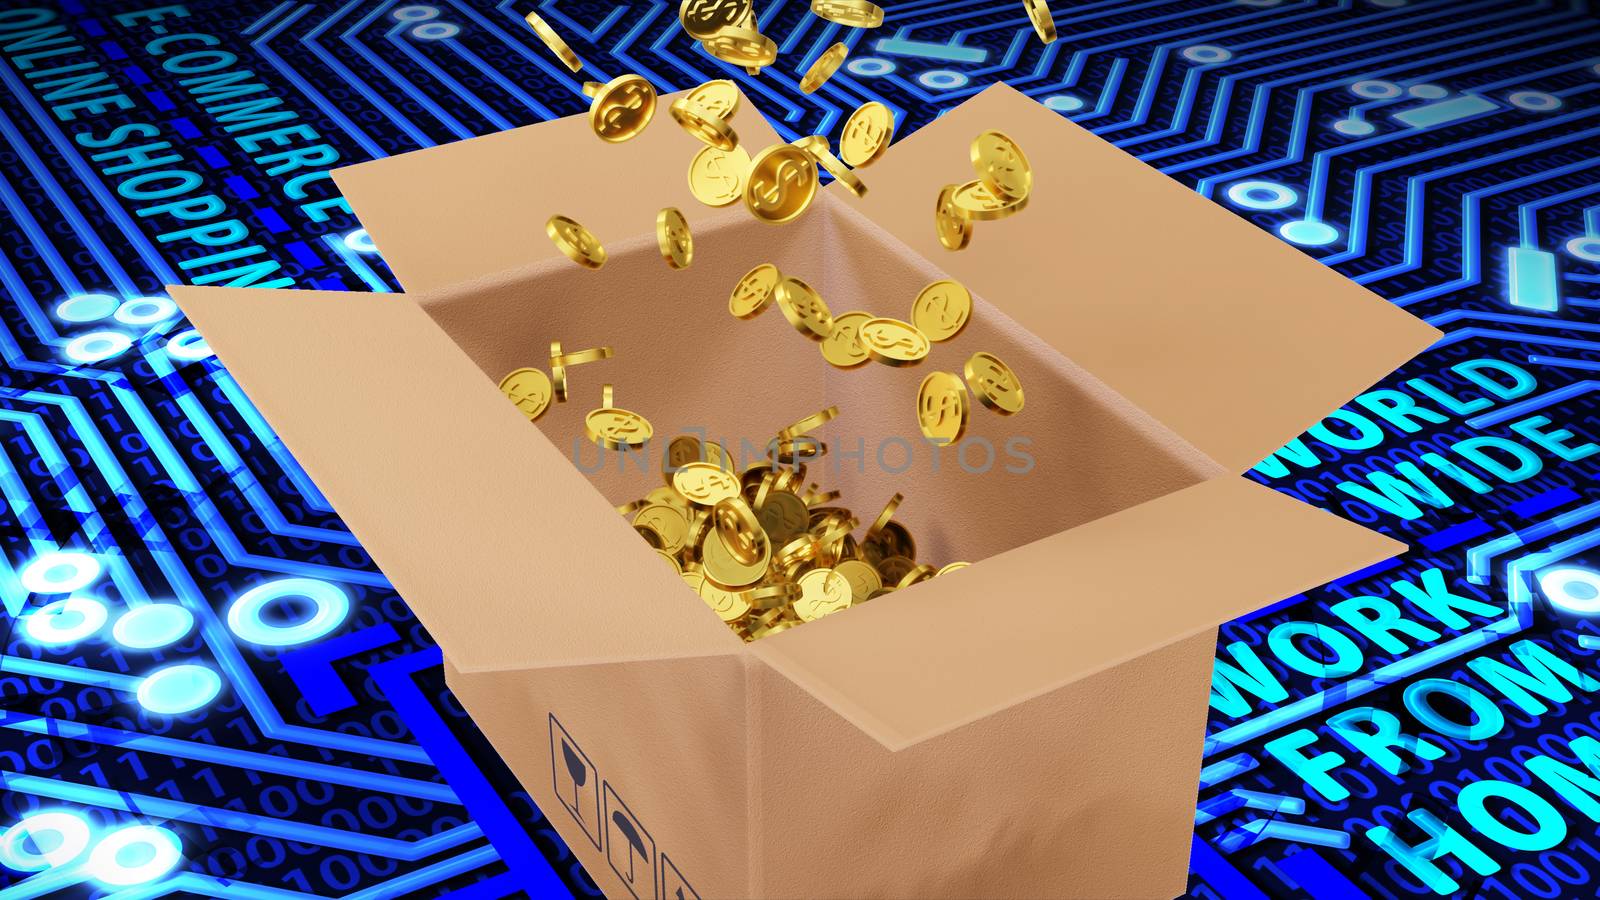 8K 3D Rendered a number of Golden Dollars Coins Falling into Brown Package on Circuit Board and Binary Code Background Still Image